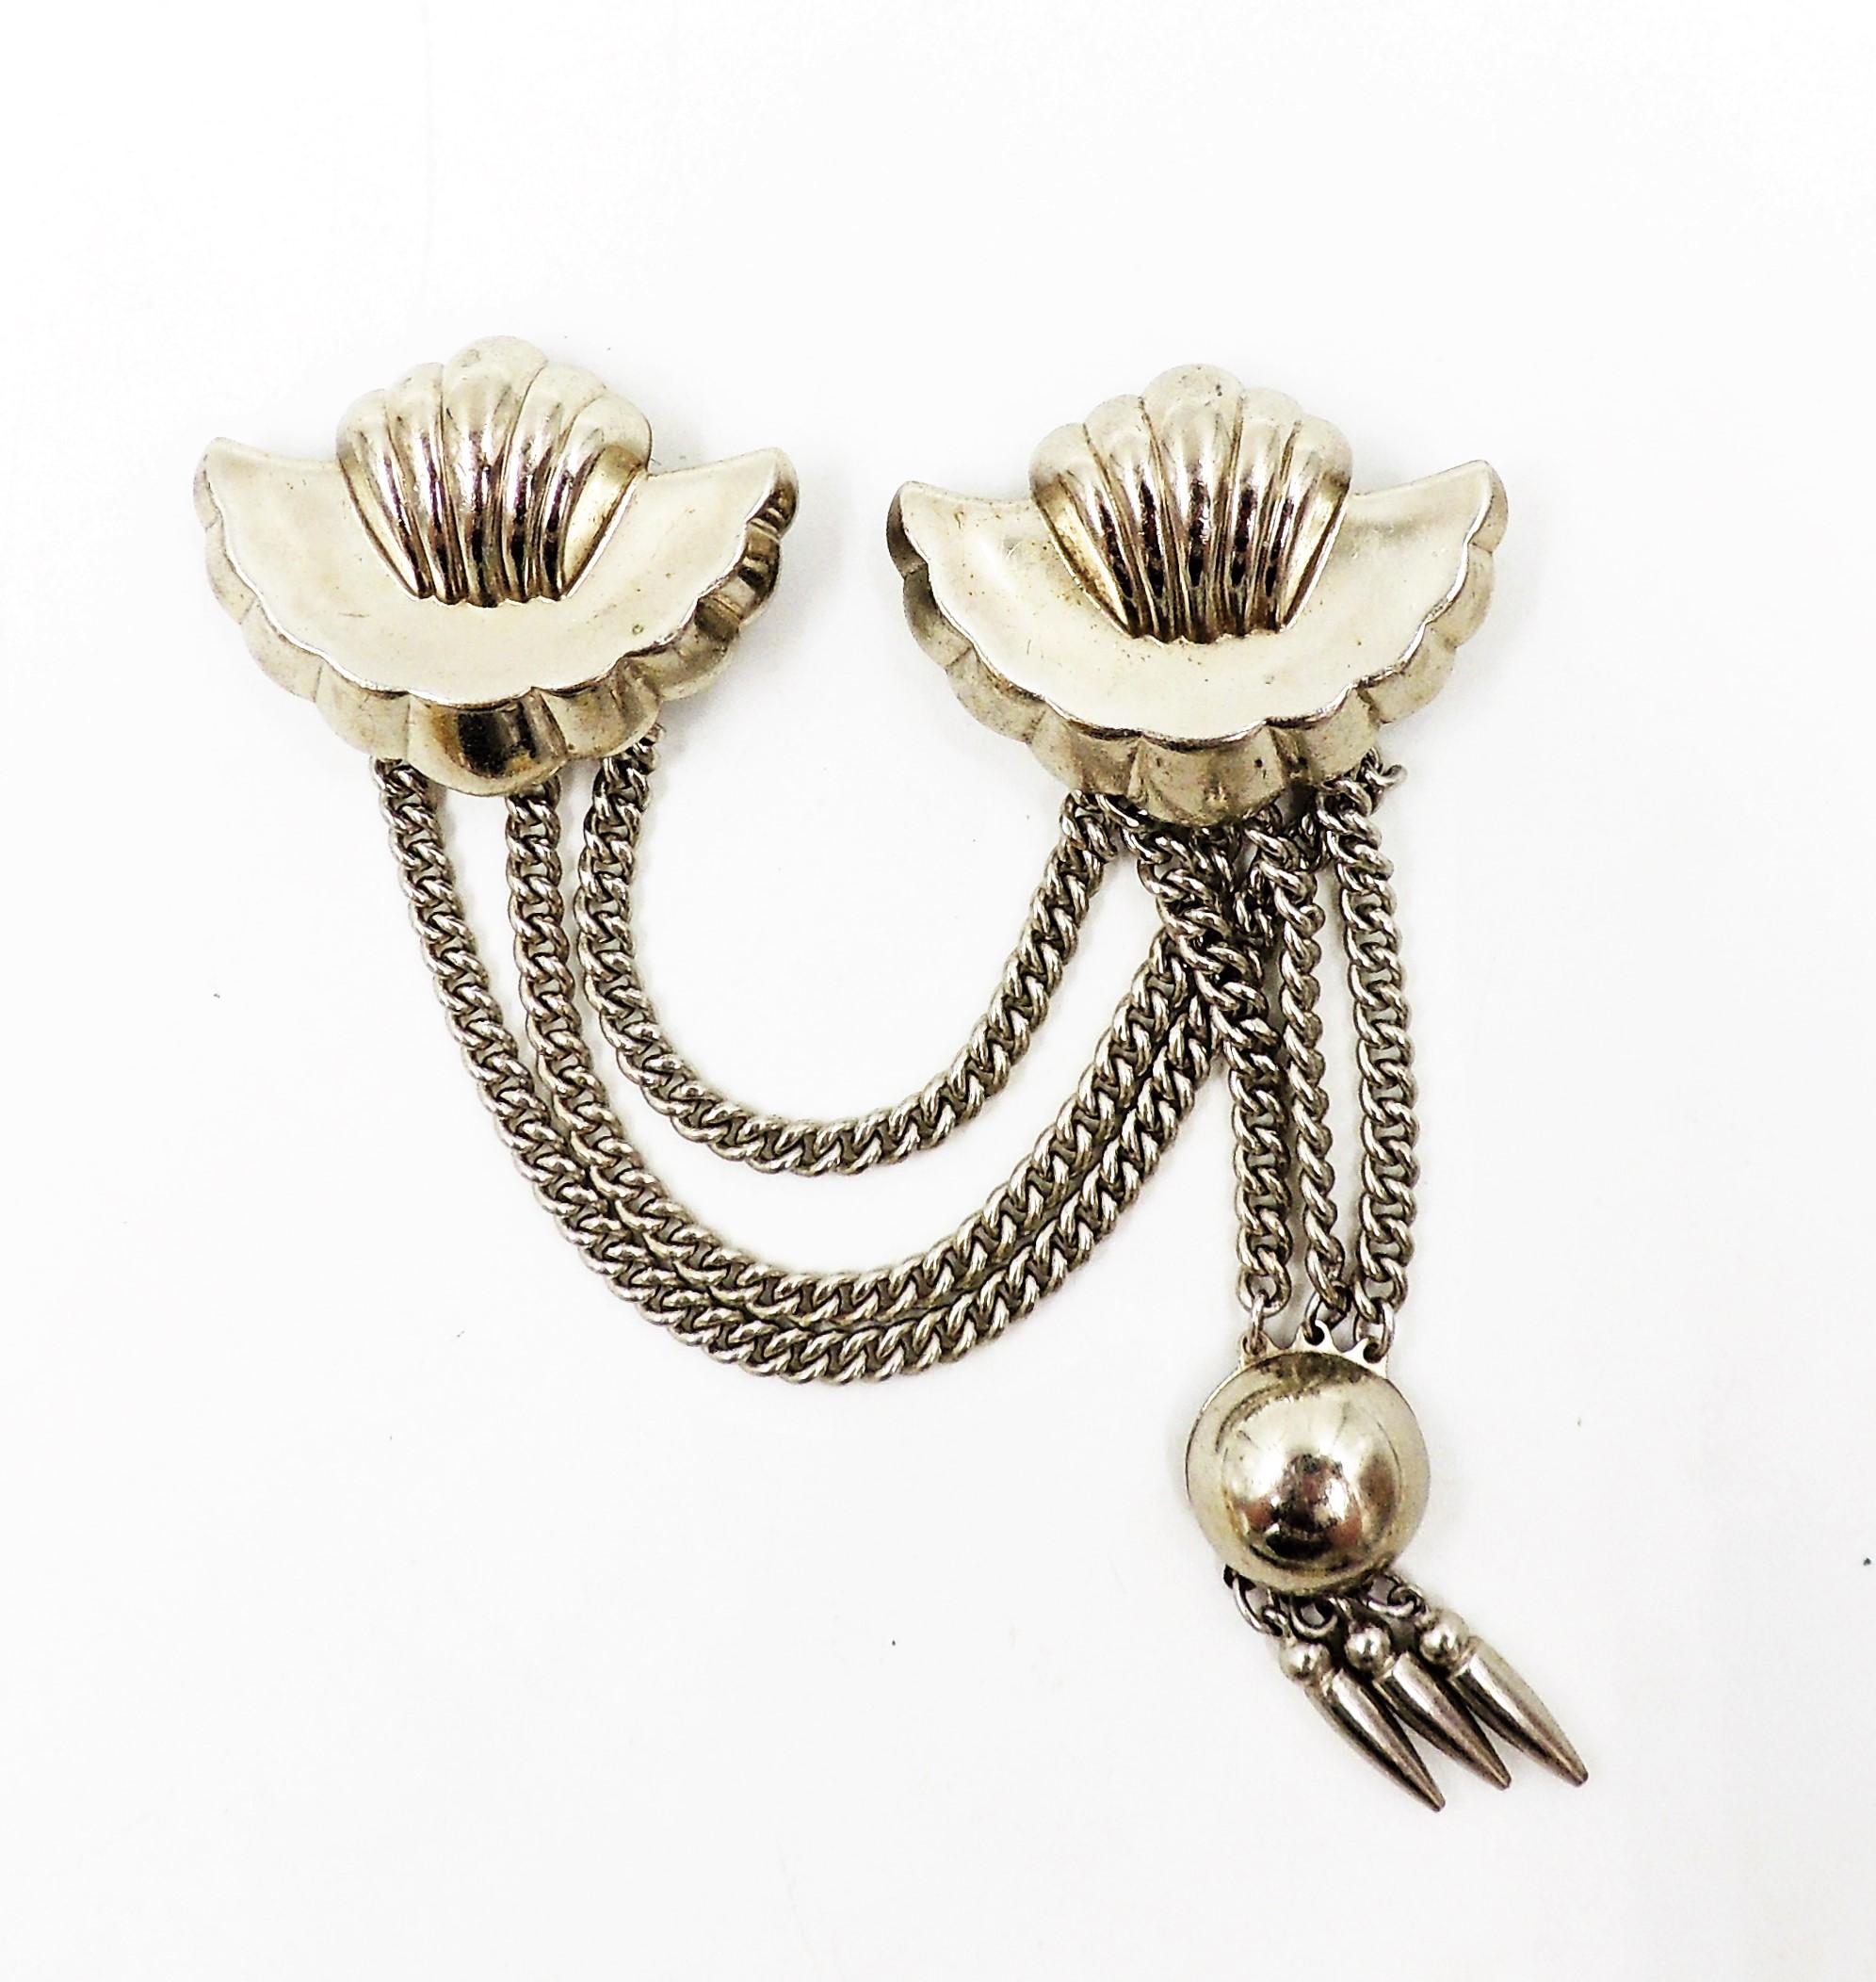 Vintage Signed Monet Convertible Silvertone Chatelaine Brooch, 1947 In Good Condition For Sale In Easton, PA